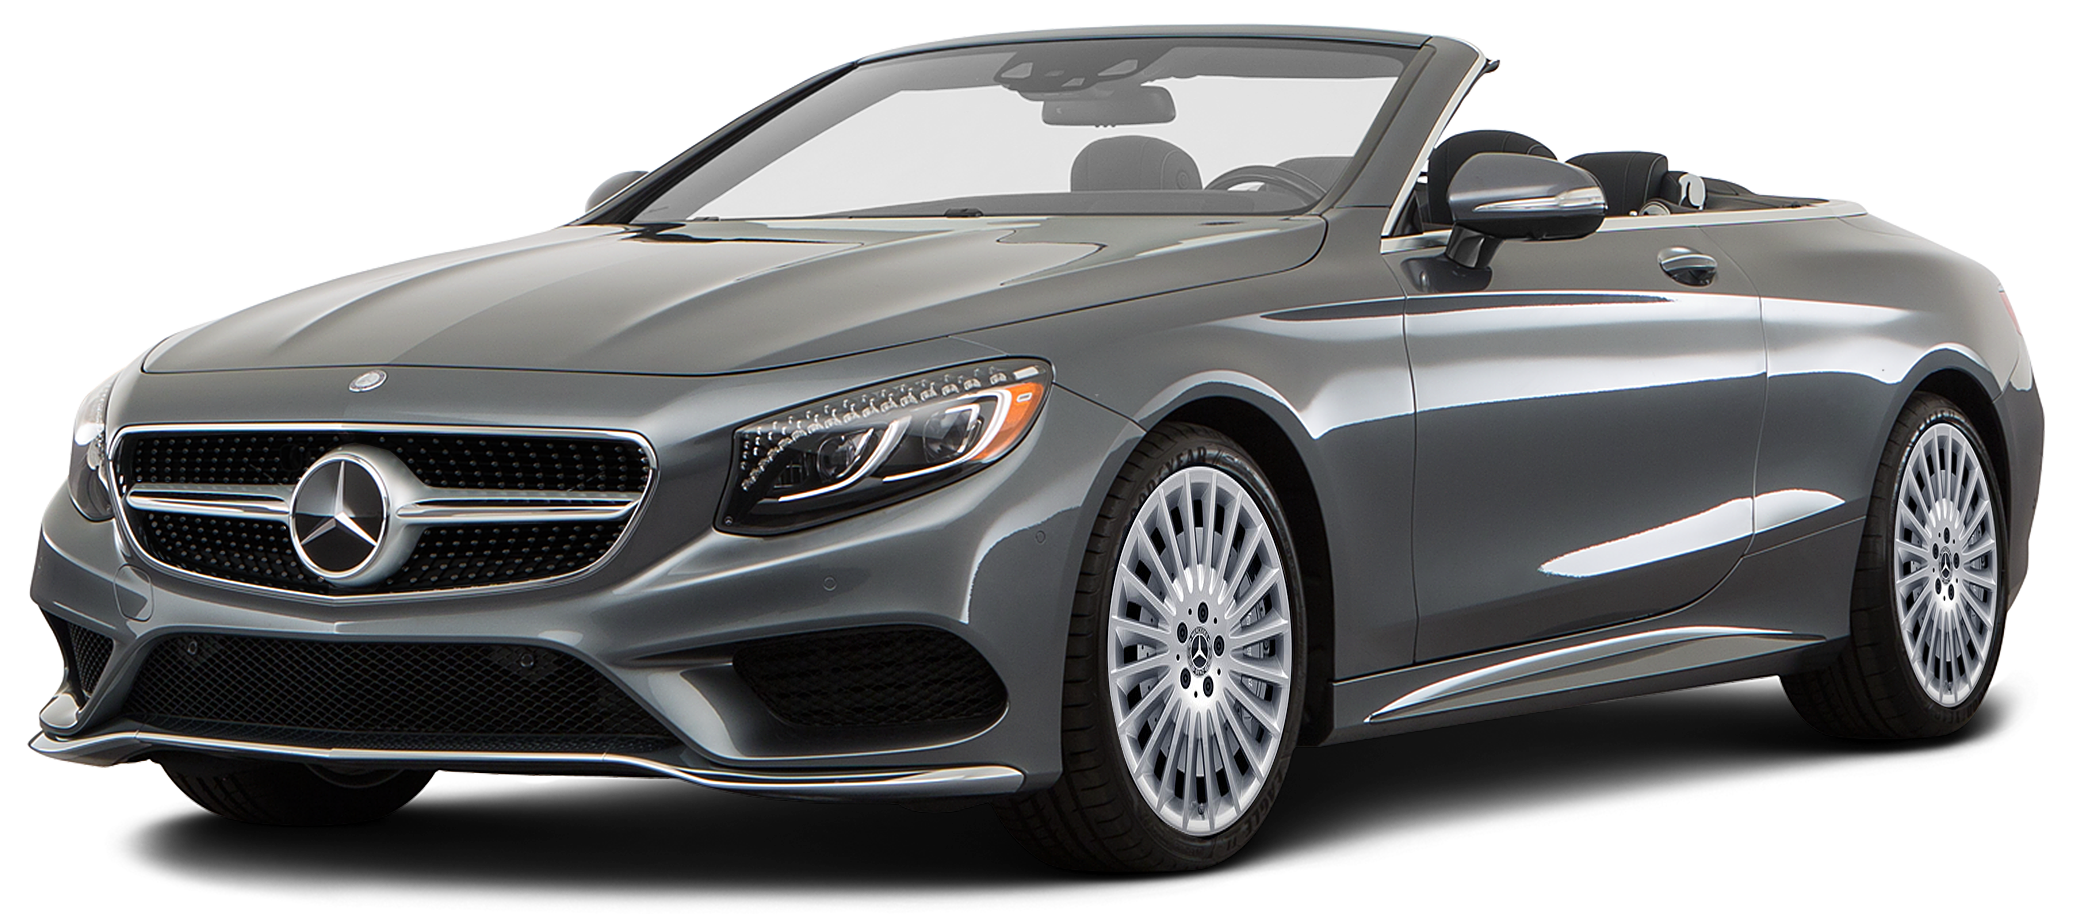 2019-mercedes-benz-s-class-incentives-specials-offers-in-erie-pa